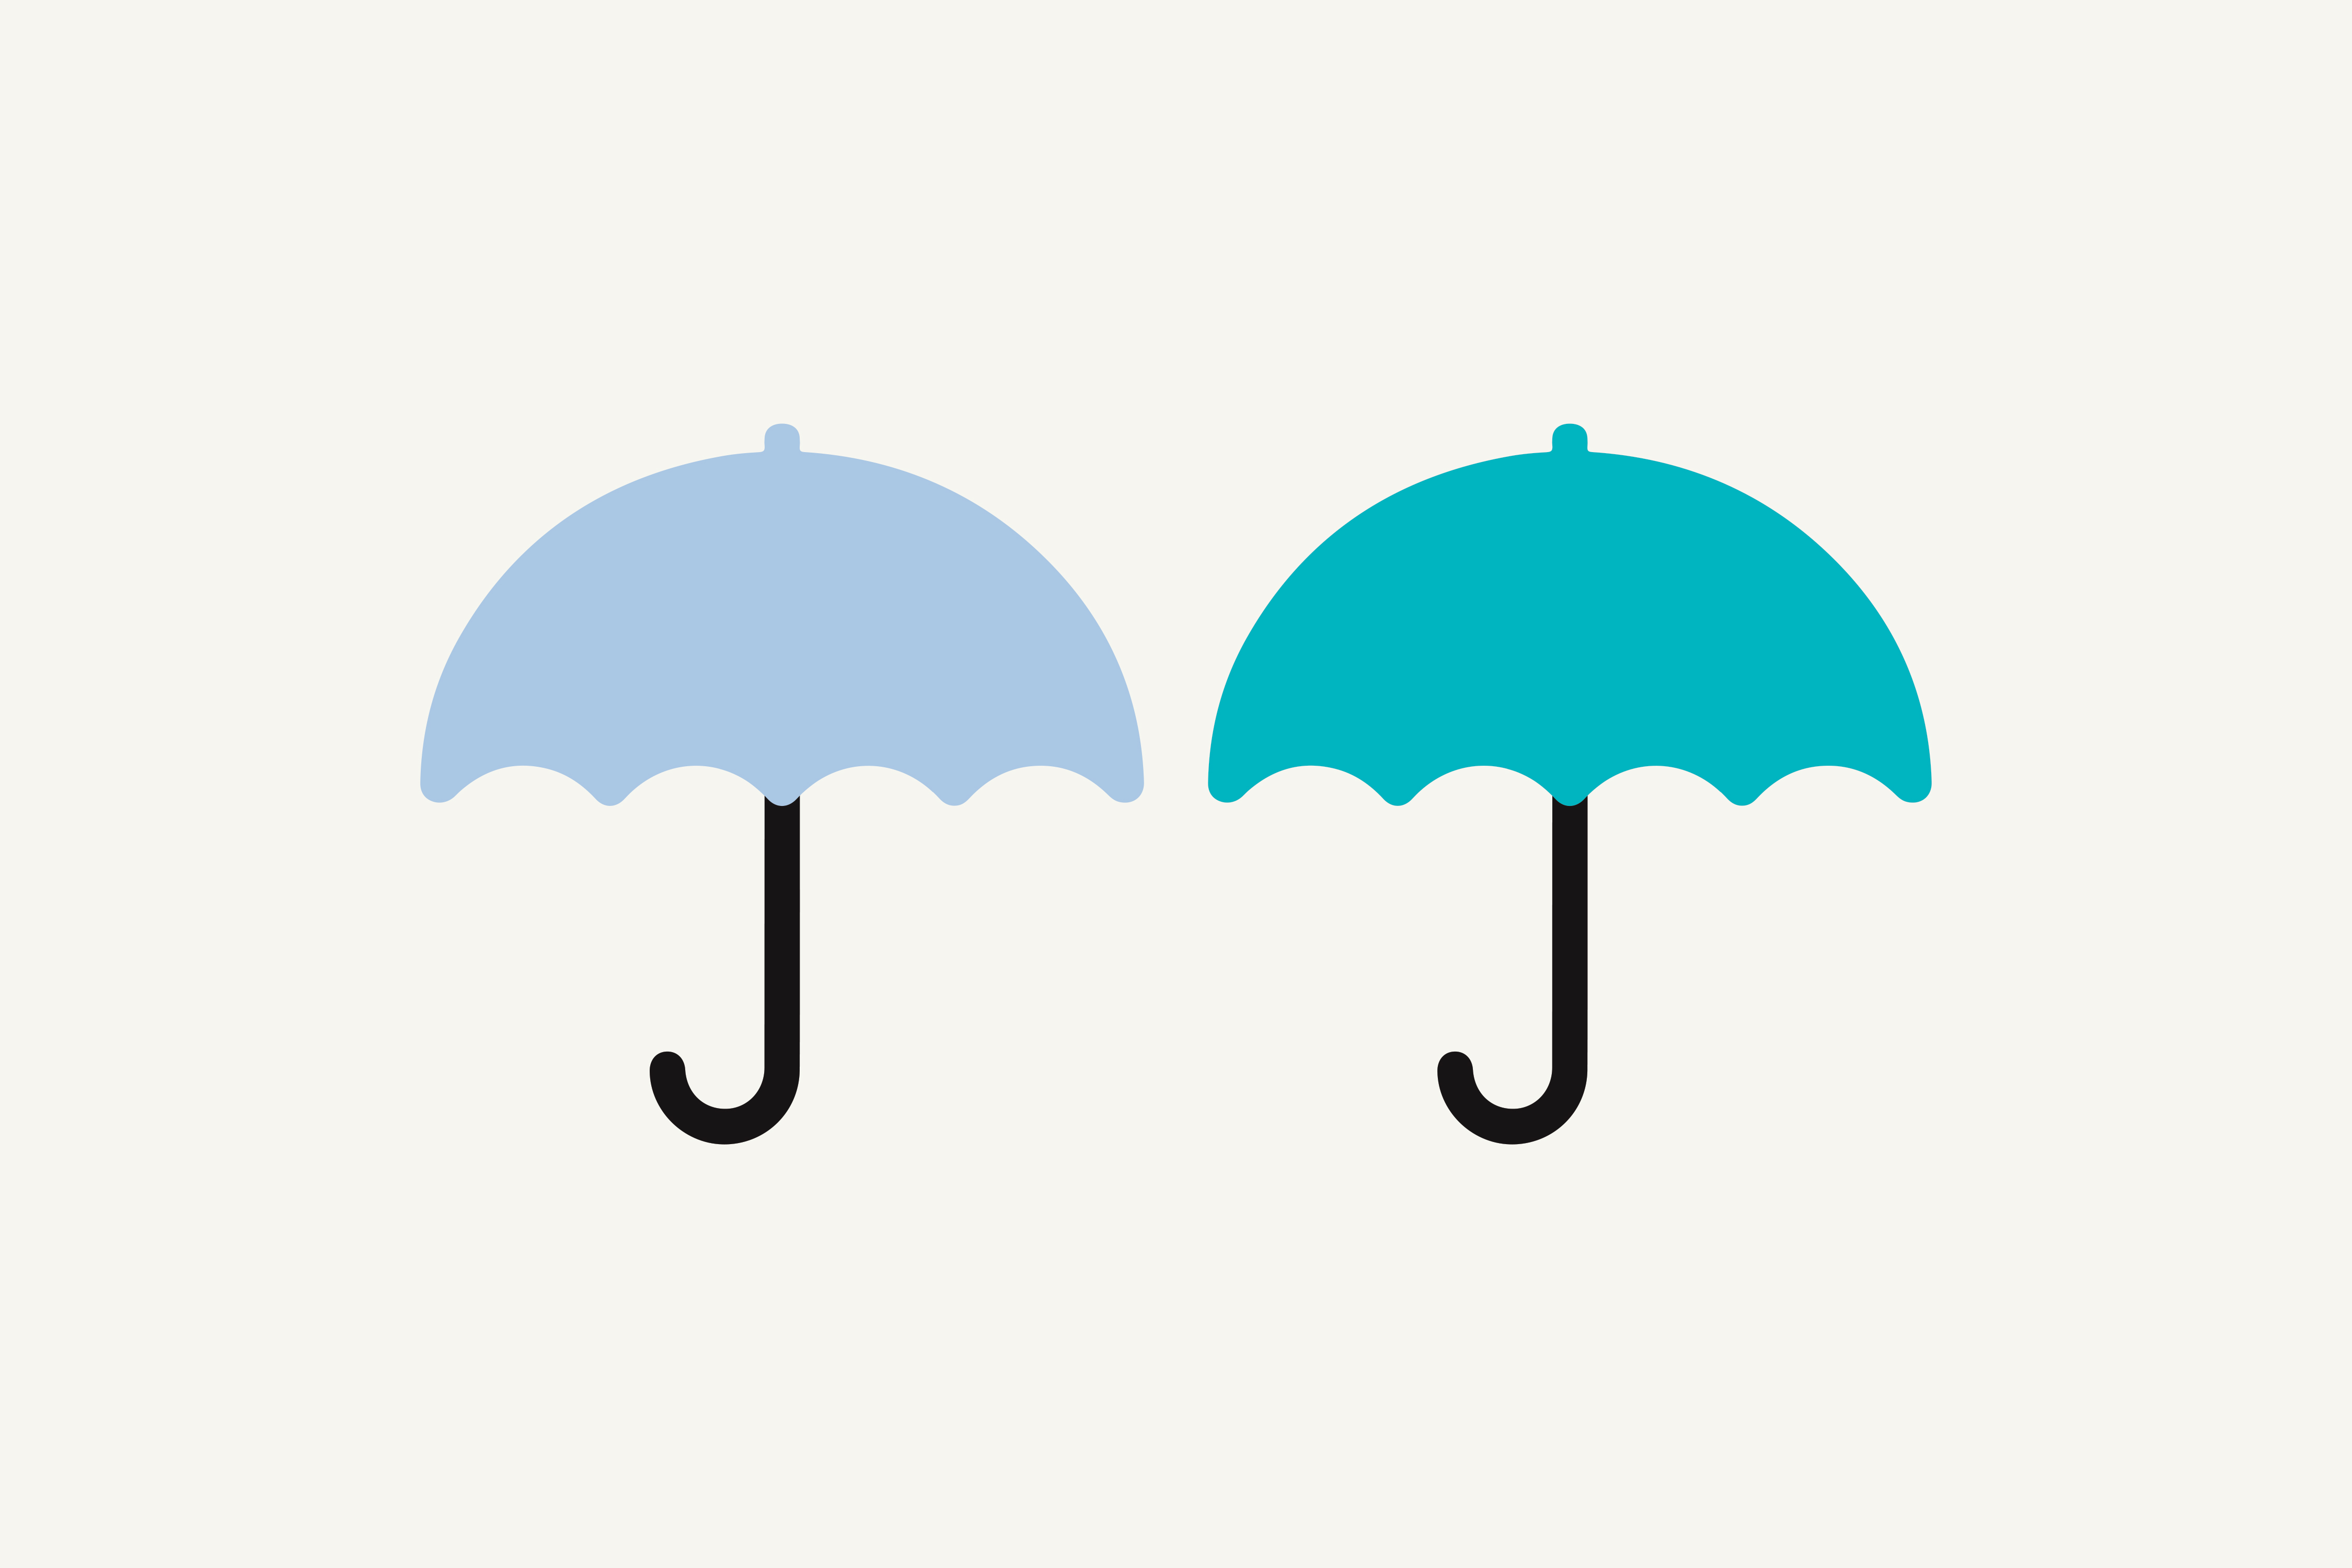 Graphic of two umbrellas where one is blue and the other green